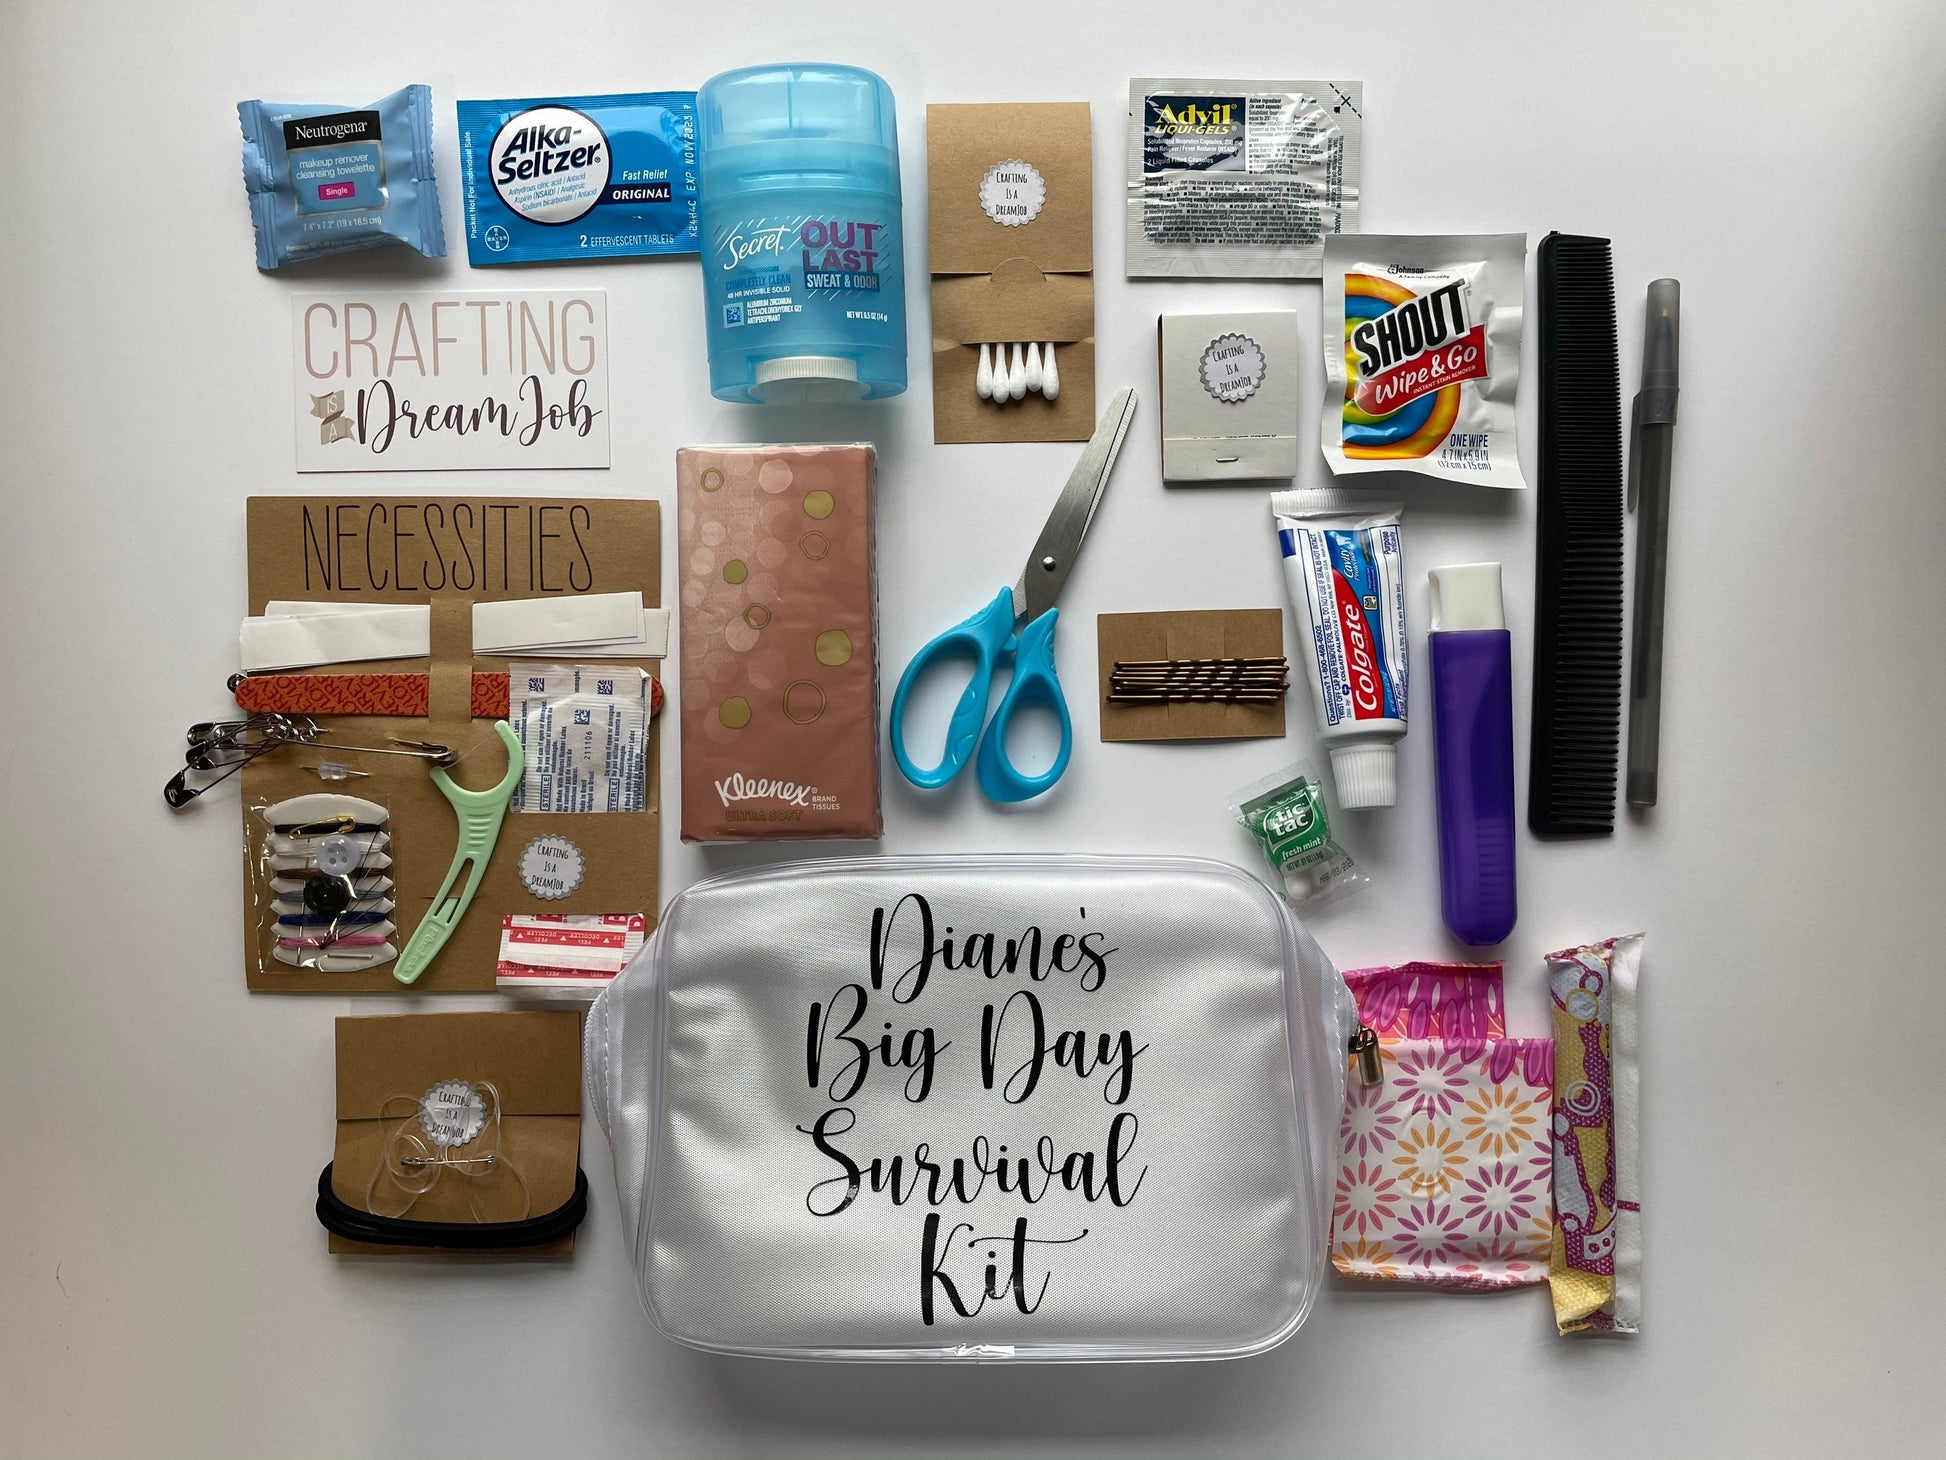 Wedding Emergency Kit: What you need to have packed in case